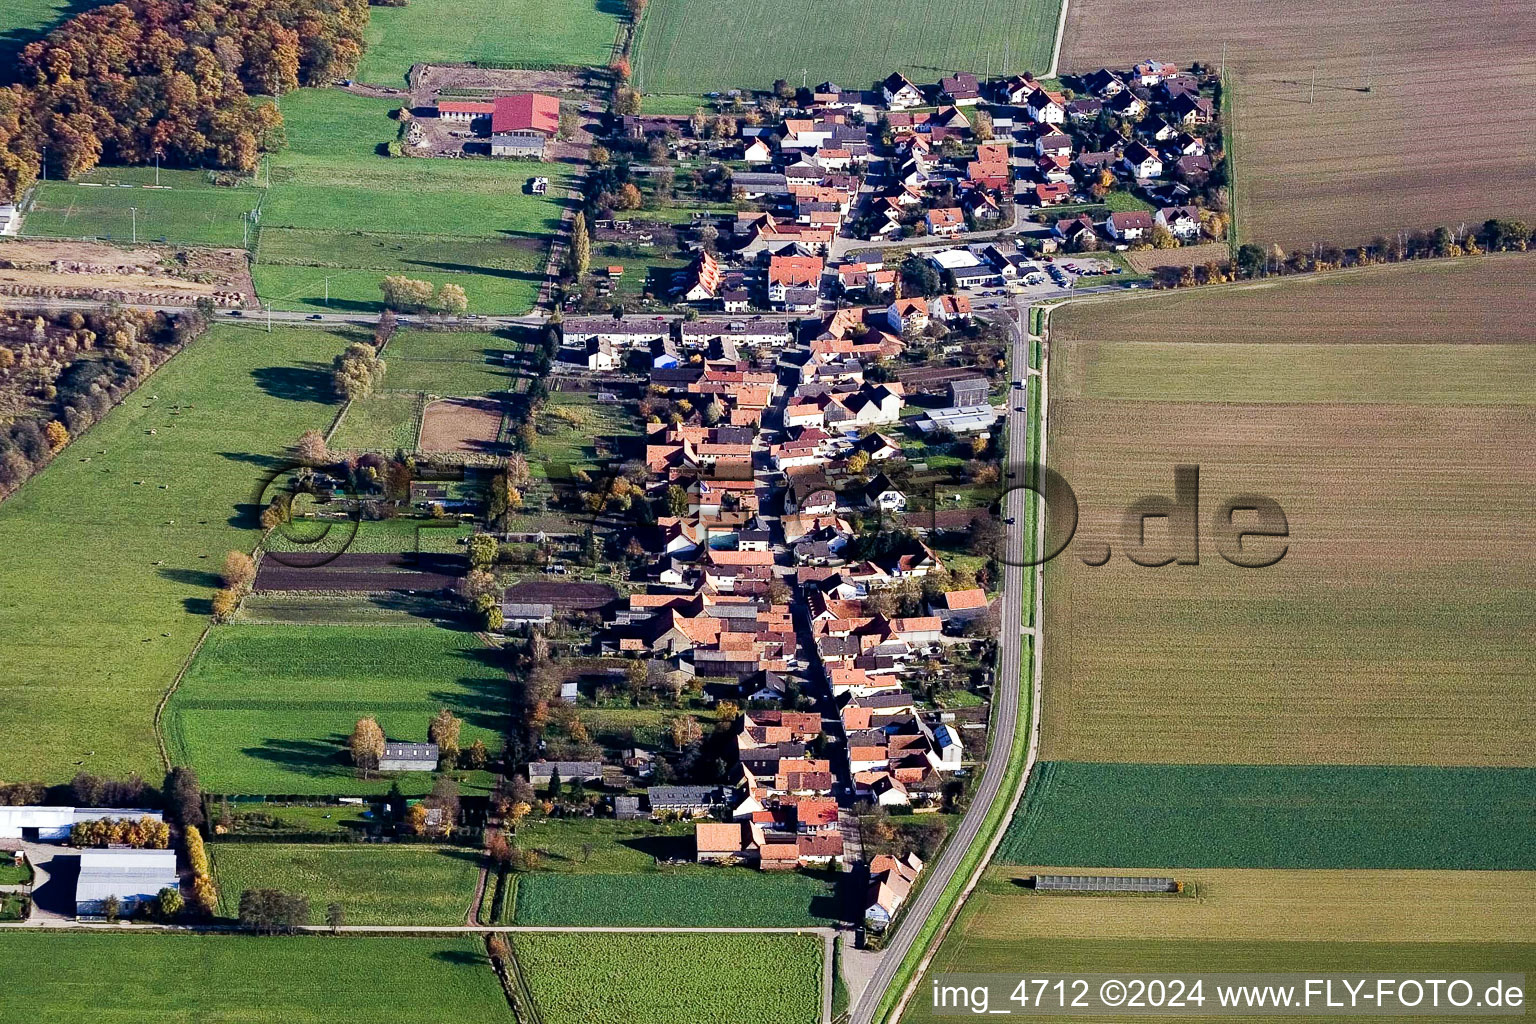 Aerial view of Village - view on the edge of agricultural fields and farmland in the district Minderslachen in Kandel in the state Rhineland-Palatinate